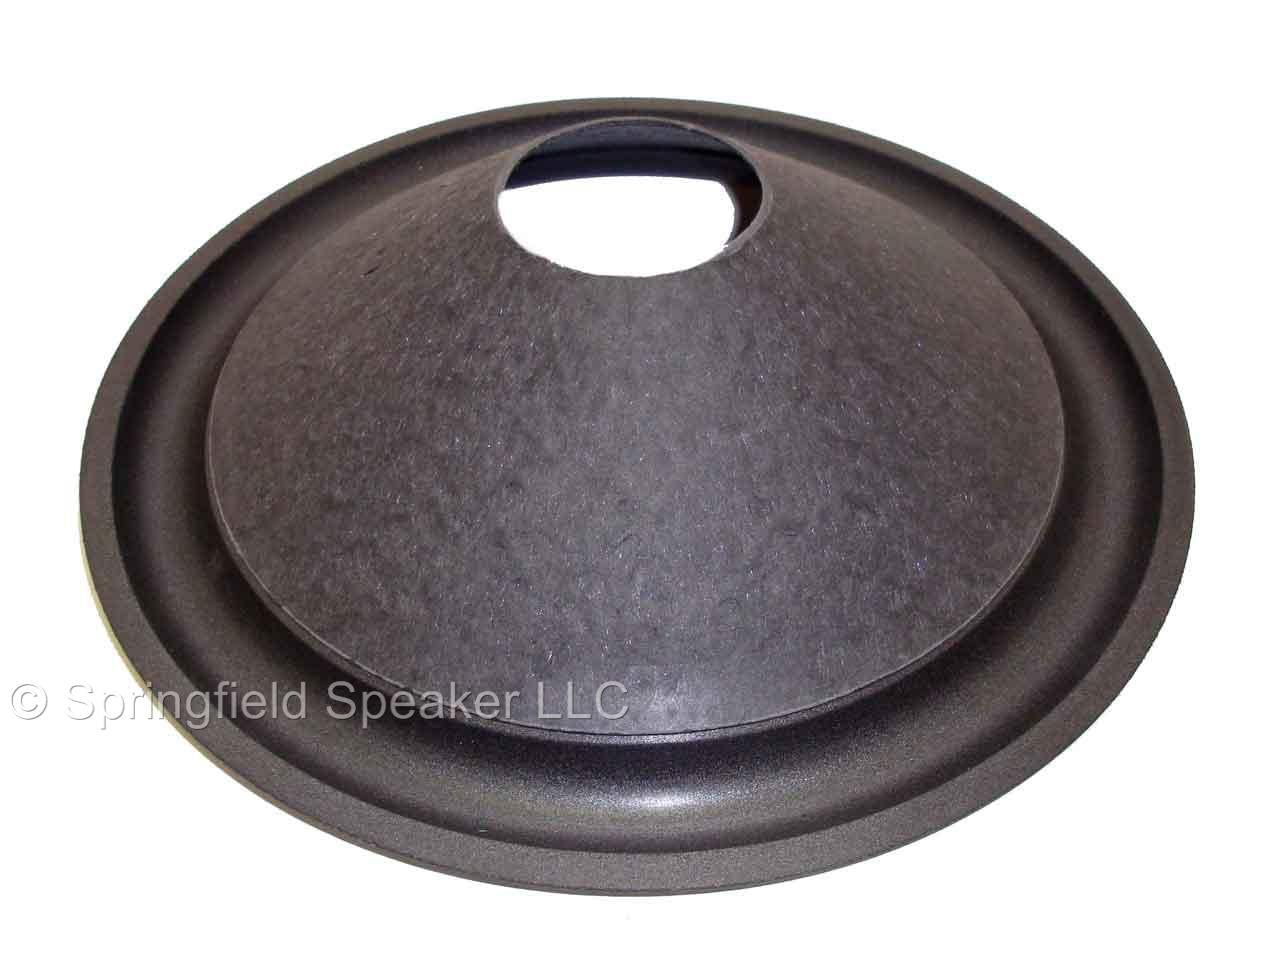 15" Pressed Kevlar Pulp Subwoofer Cone with Foam Surround